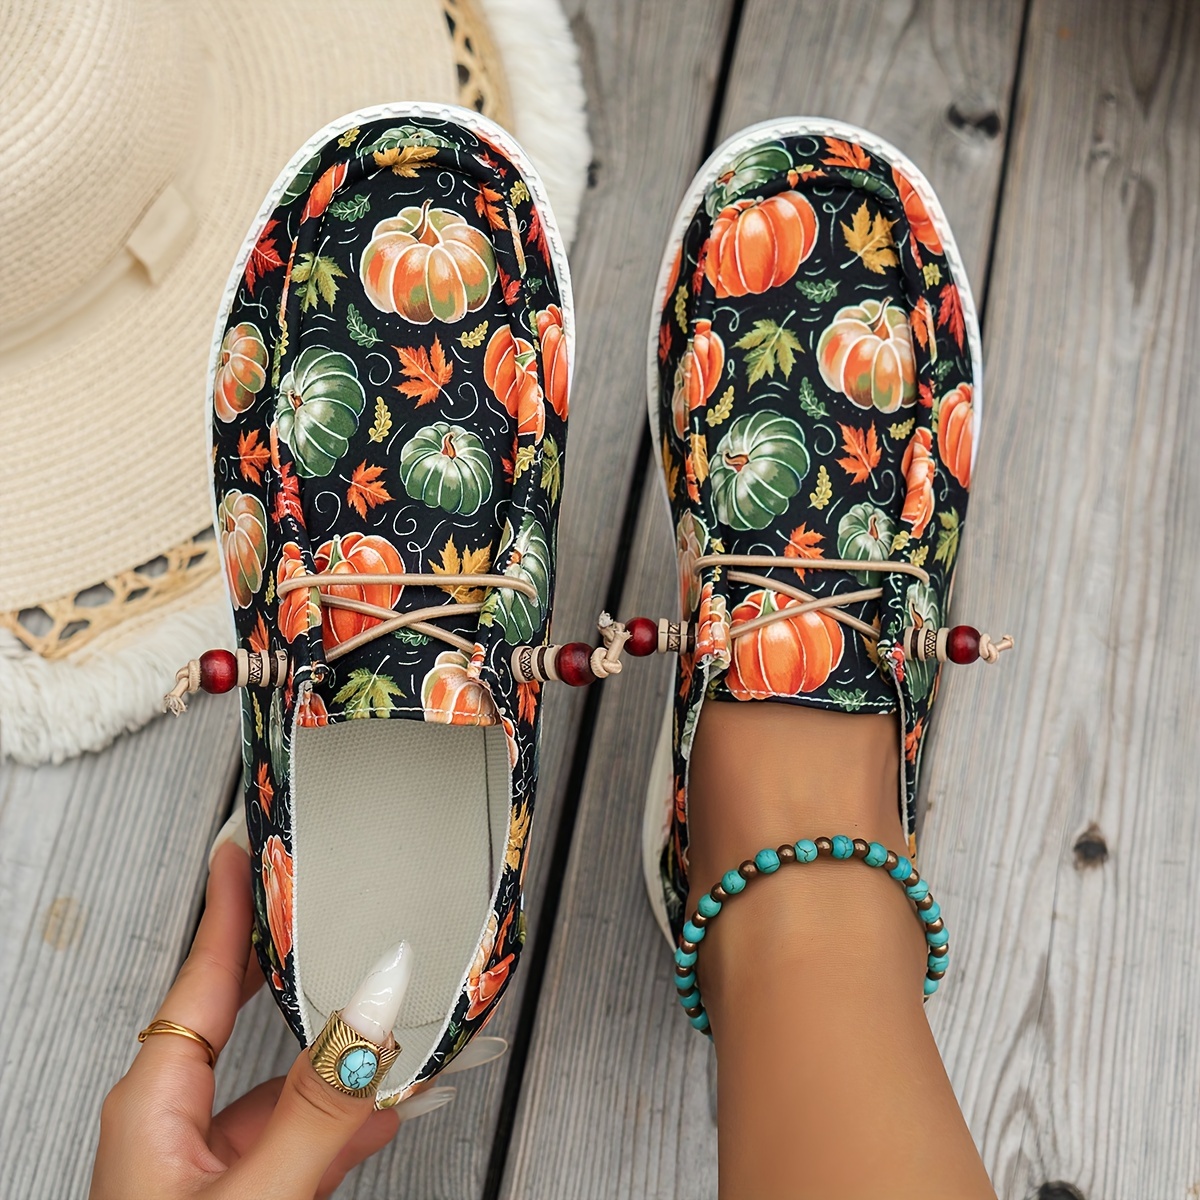 

Women's Fashion Sneakers Casual Lightweight Canvas Shoes - All-season Low Top Slip-ons With Festive Pumpkin And Maple Leaf Print, Comfortable Plain Toe Design With Flexible Pu Sole